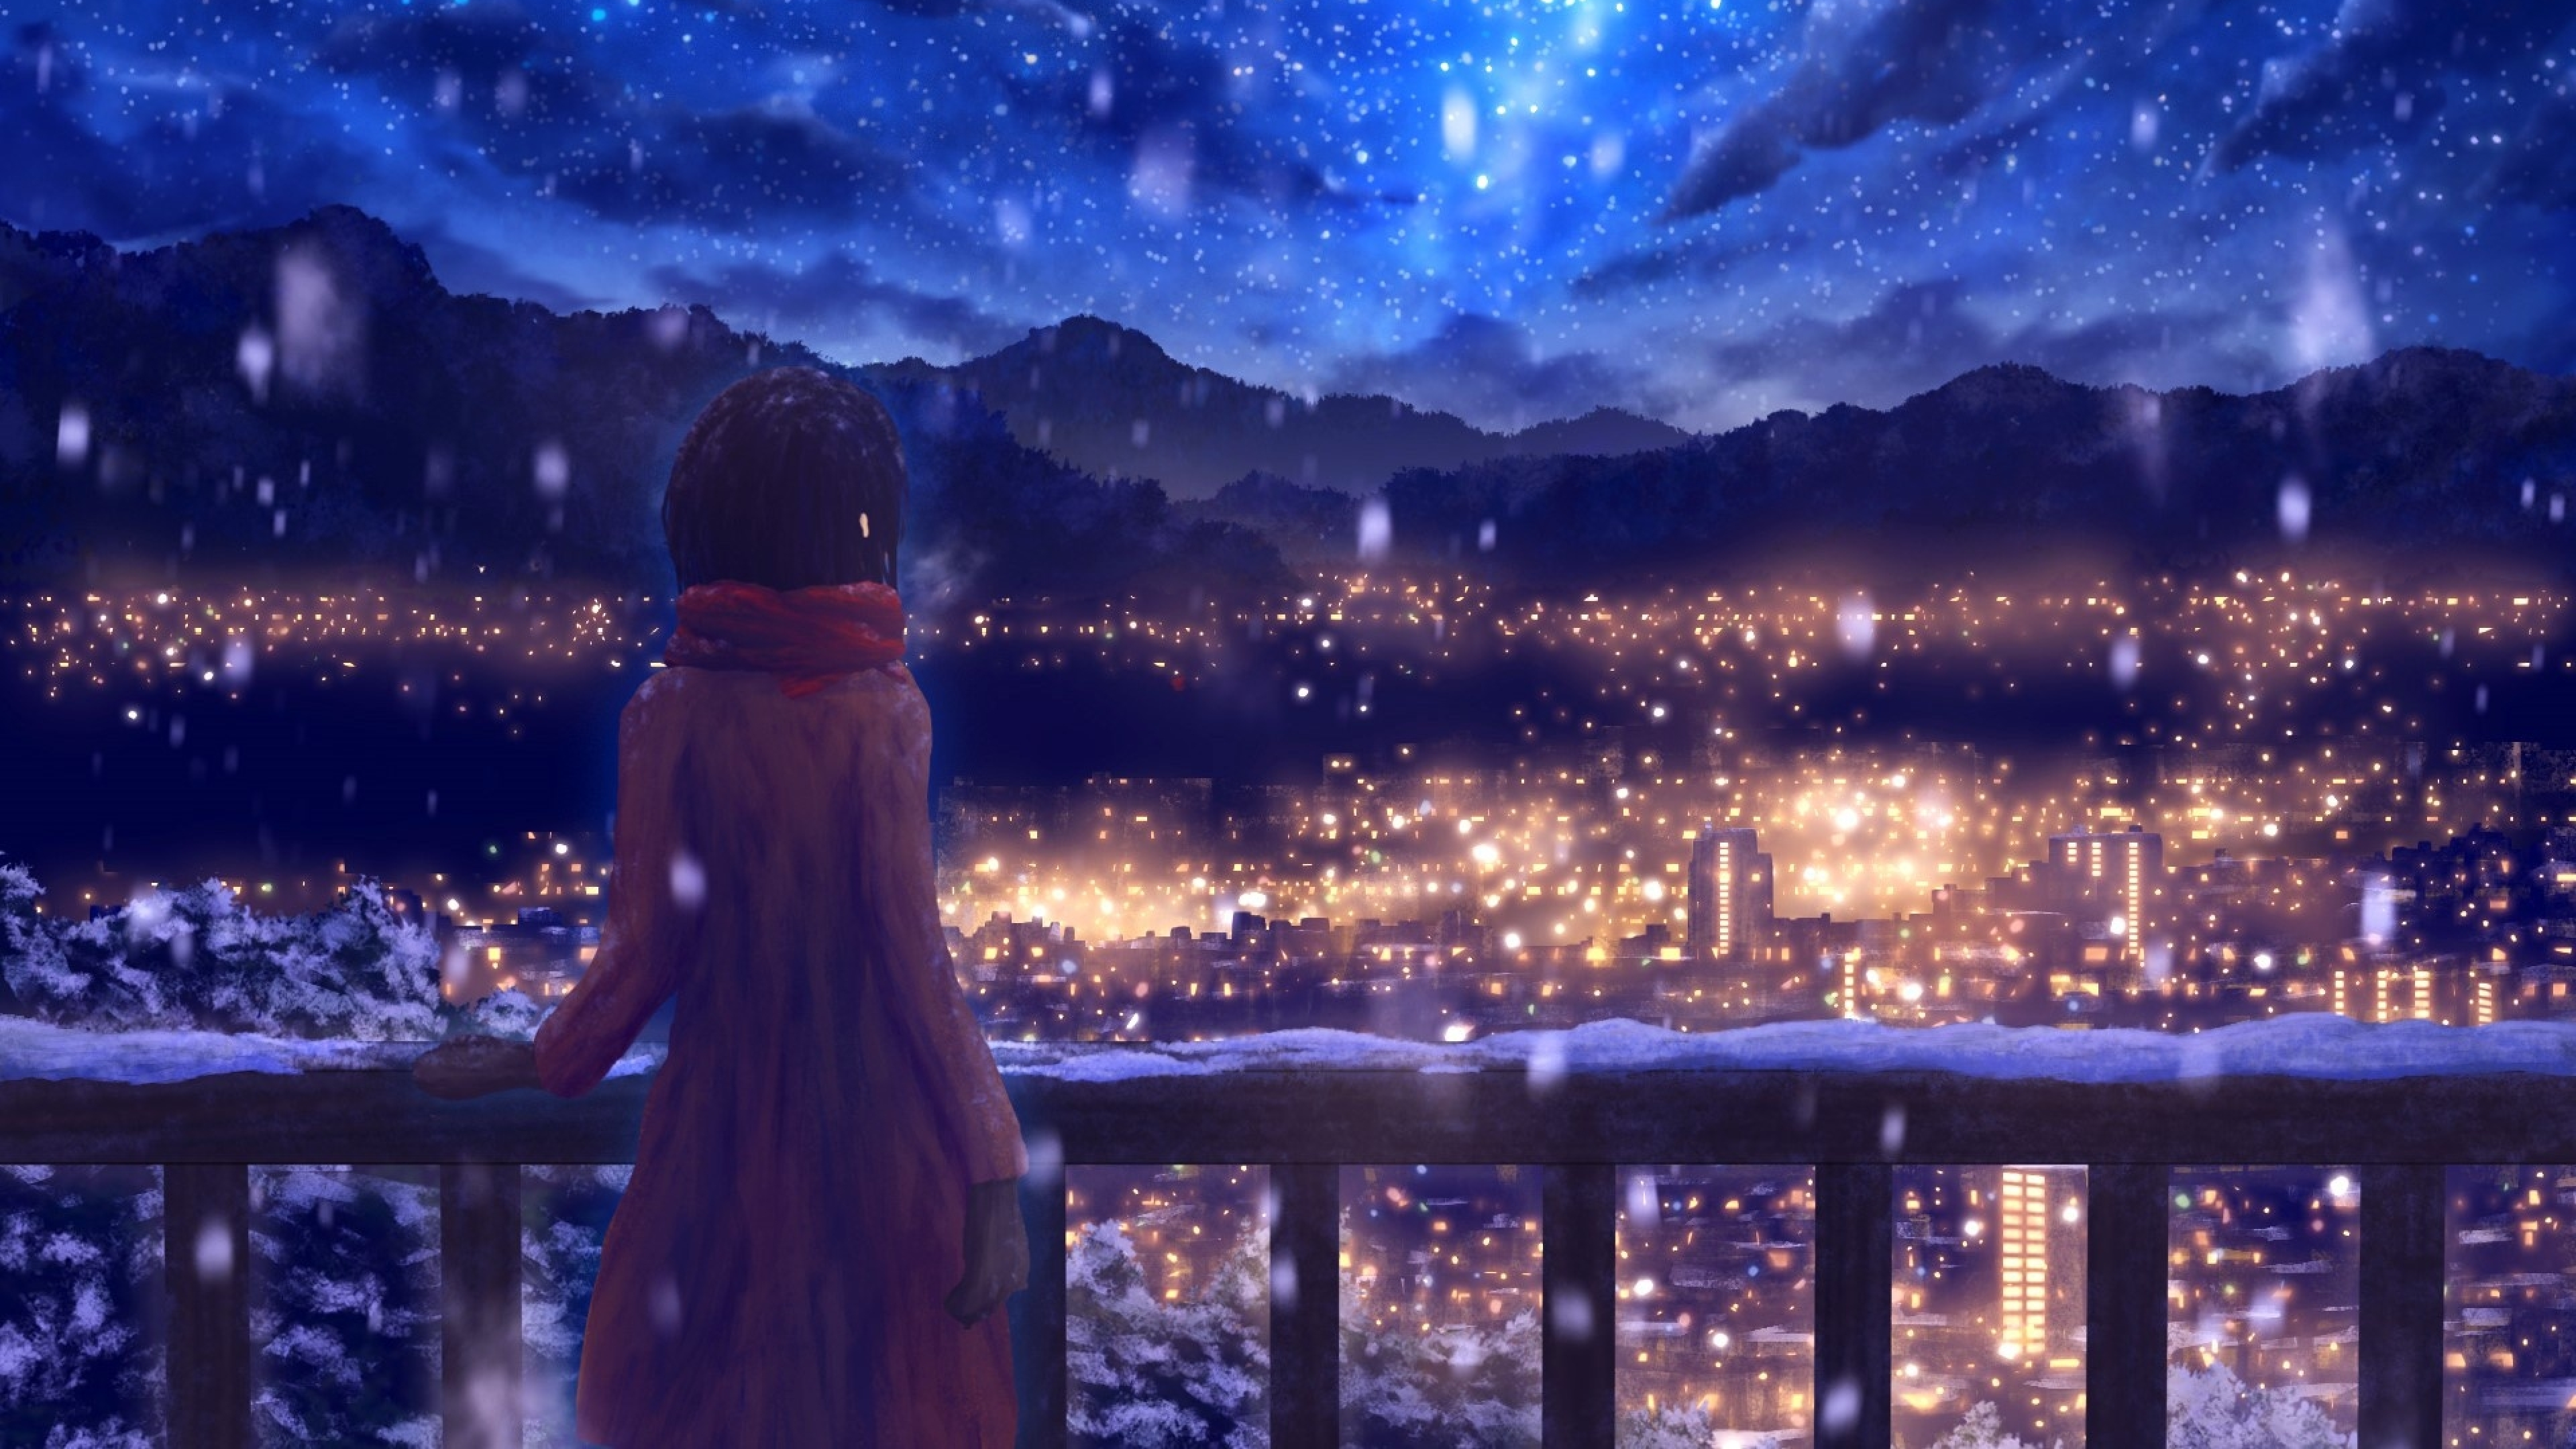 3840x2160 Anime Girl Standing Alone In Snow 4k Wallpaper Hd Nature 4k Wallpapers Images Photos And Background Wallpapers Den